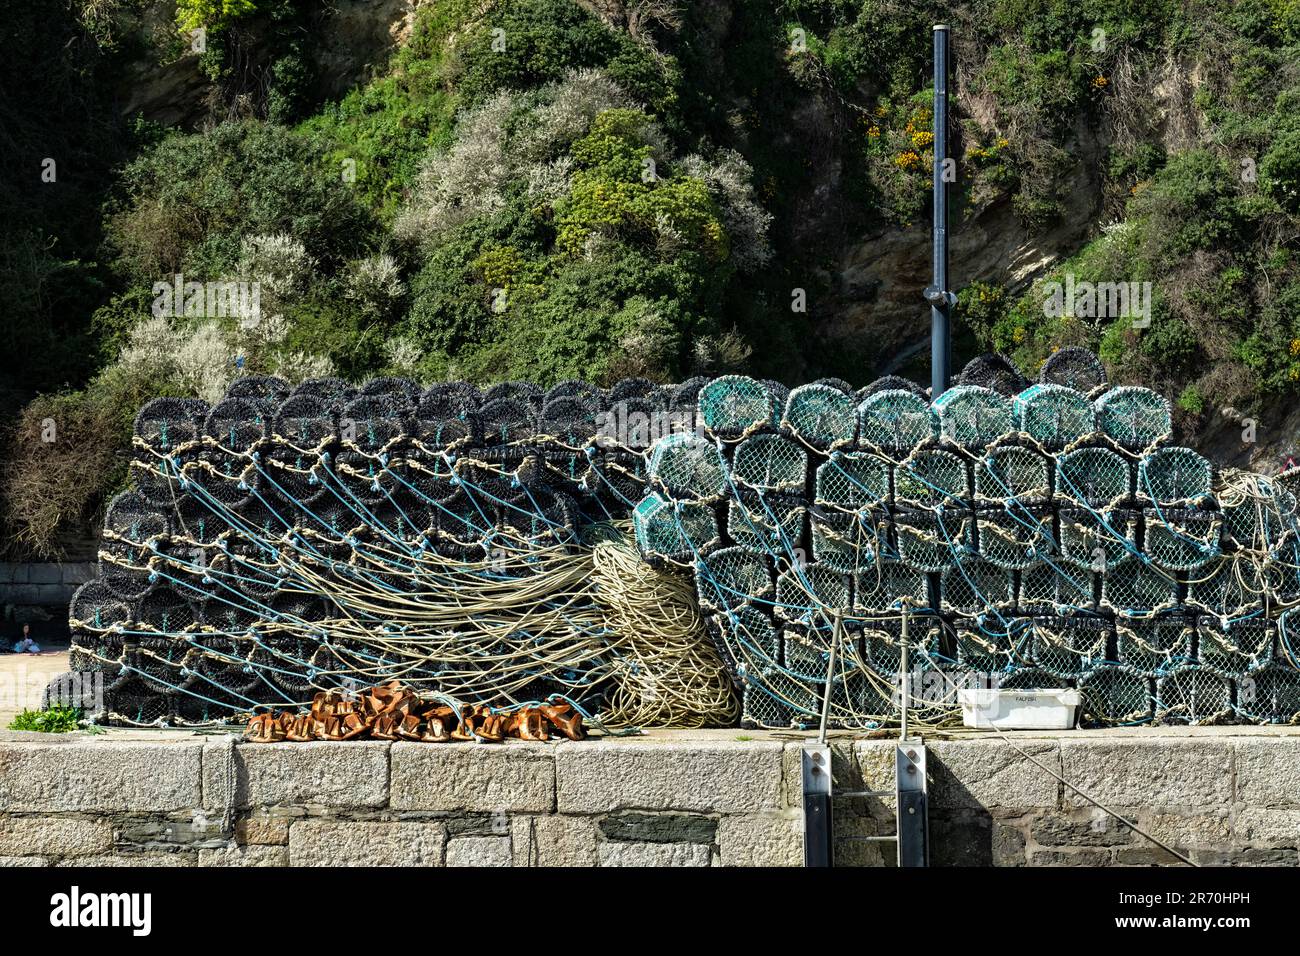 Lobster pots used for catchig lobster and crabs are stacked on the harbourside. The traps are drying in warm sunshine Stock Photo